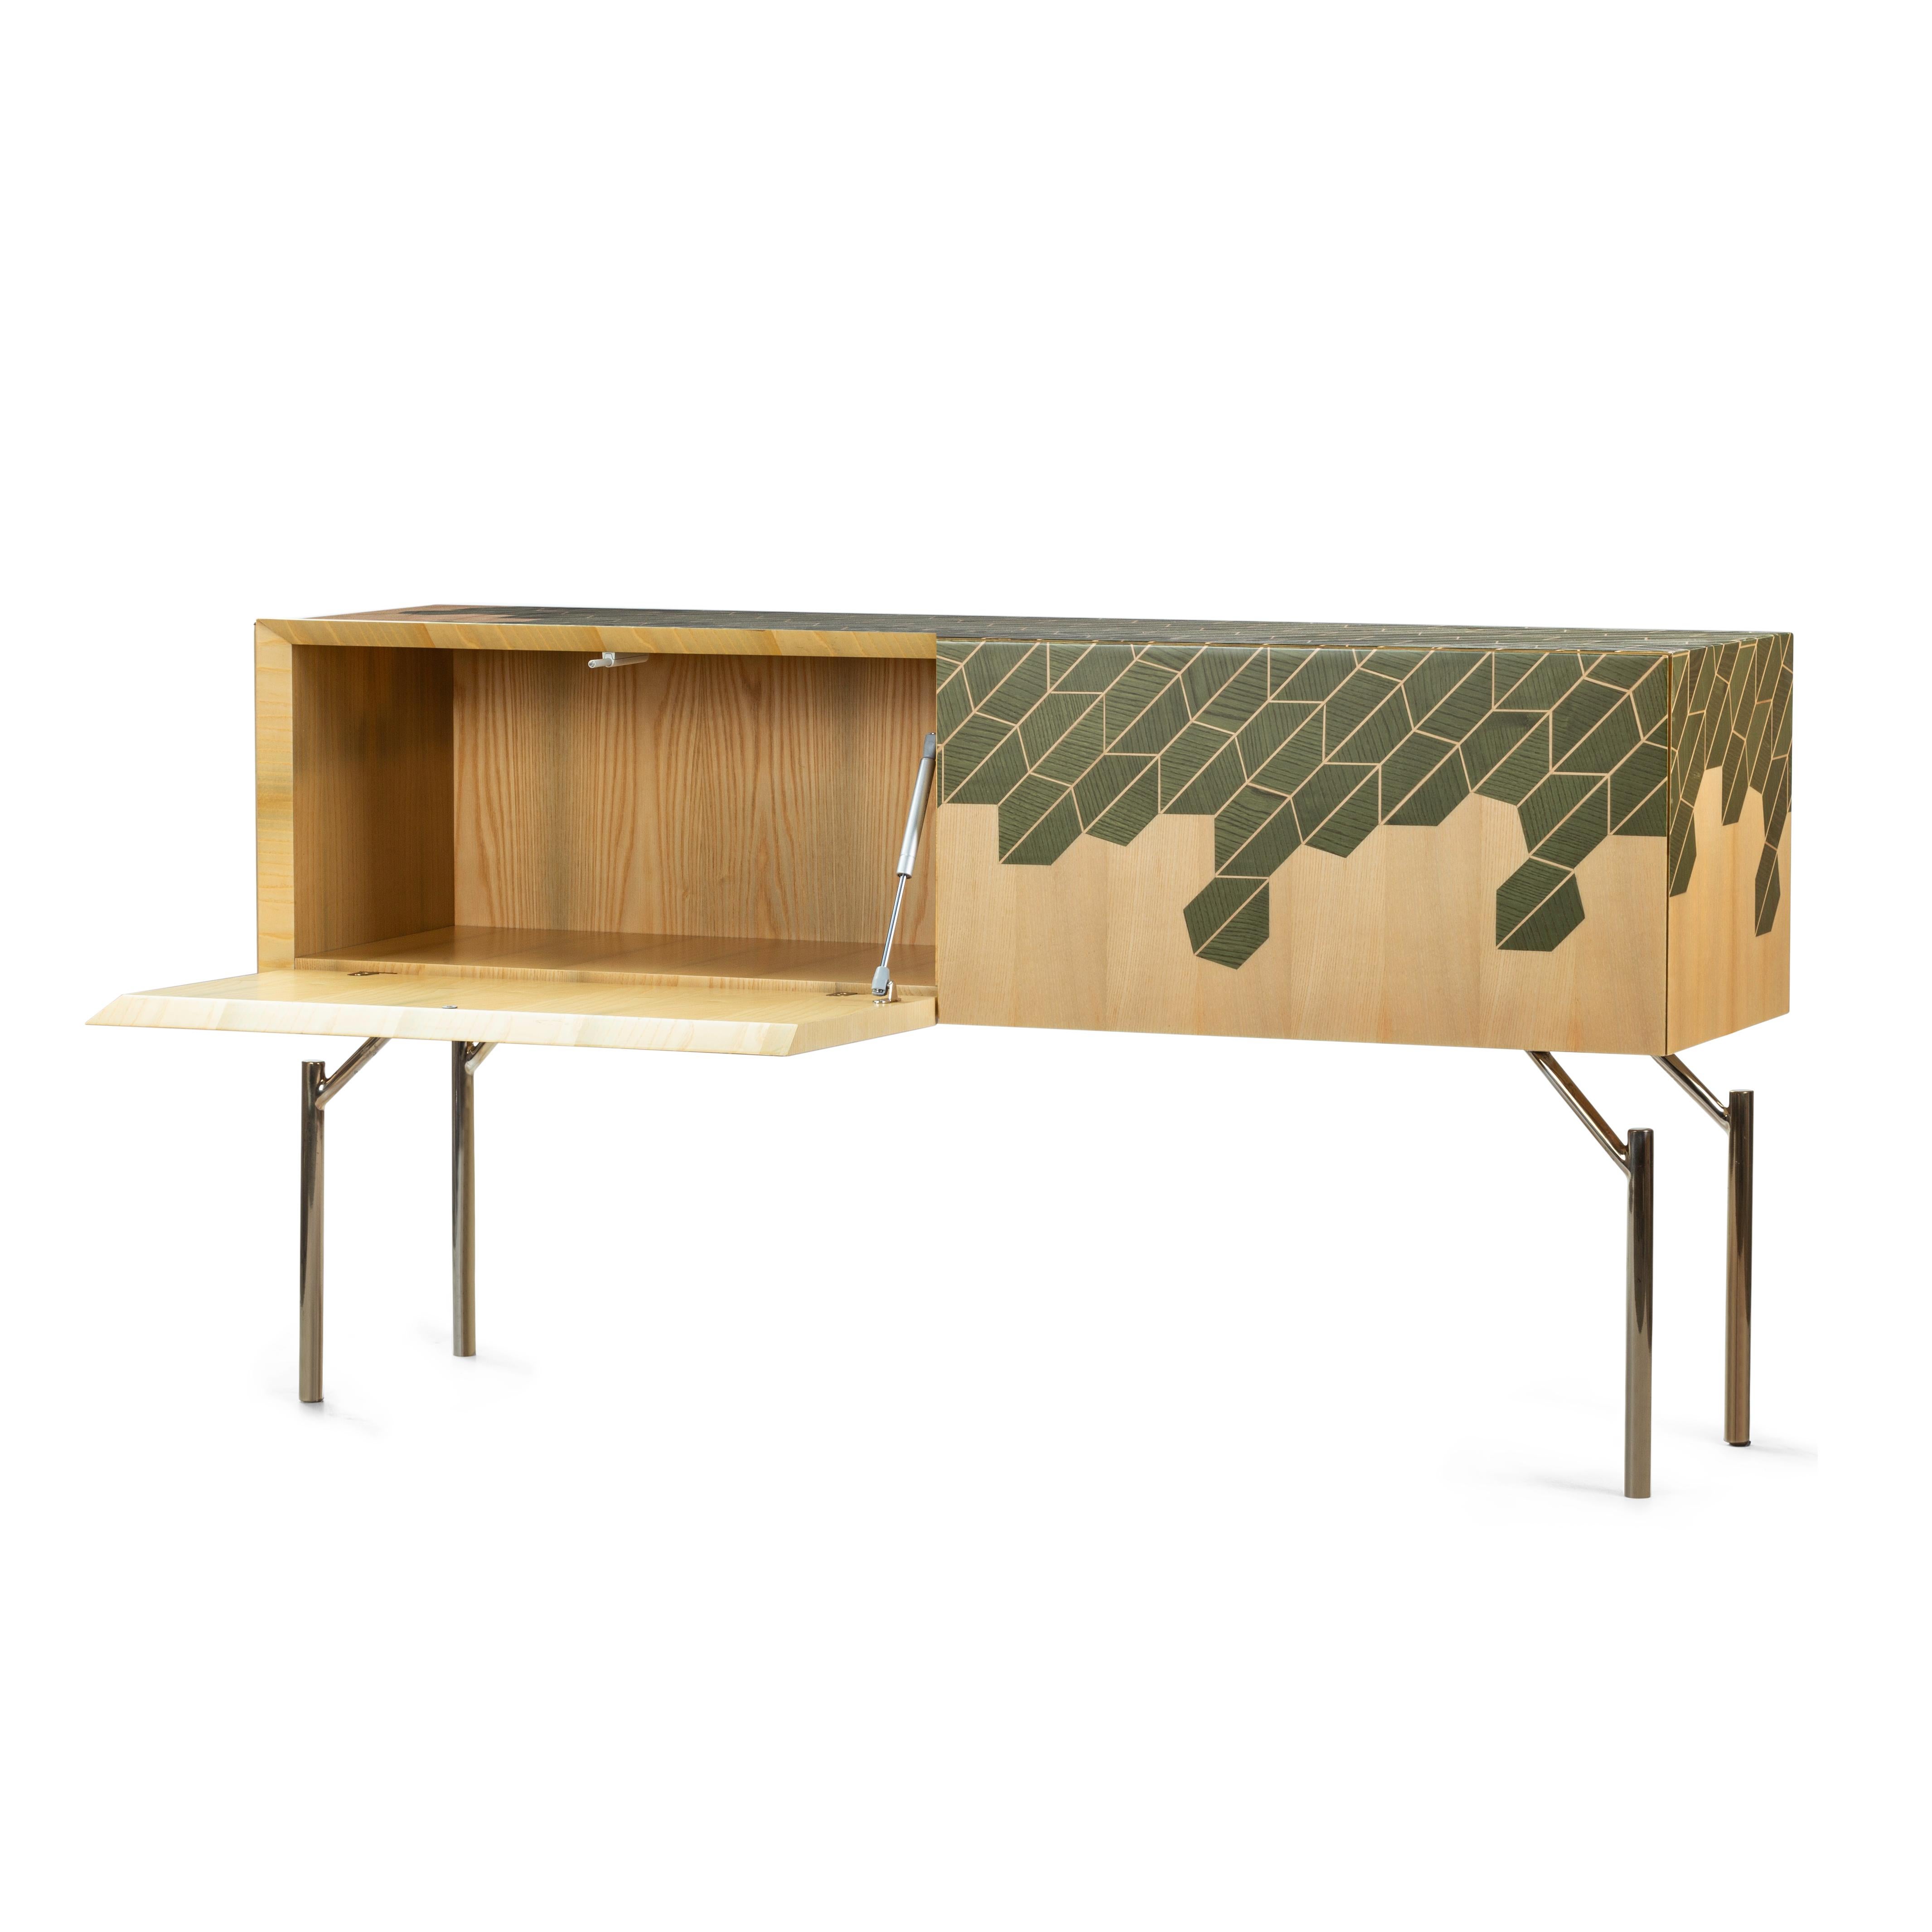 Italian 21st Century Primavera Inlaid Sideboard 45° Cut in Ash and Steel, Made in Italy For Sale